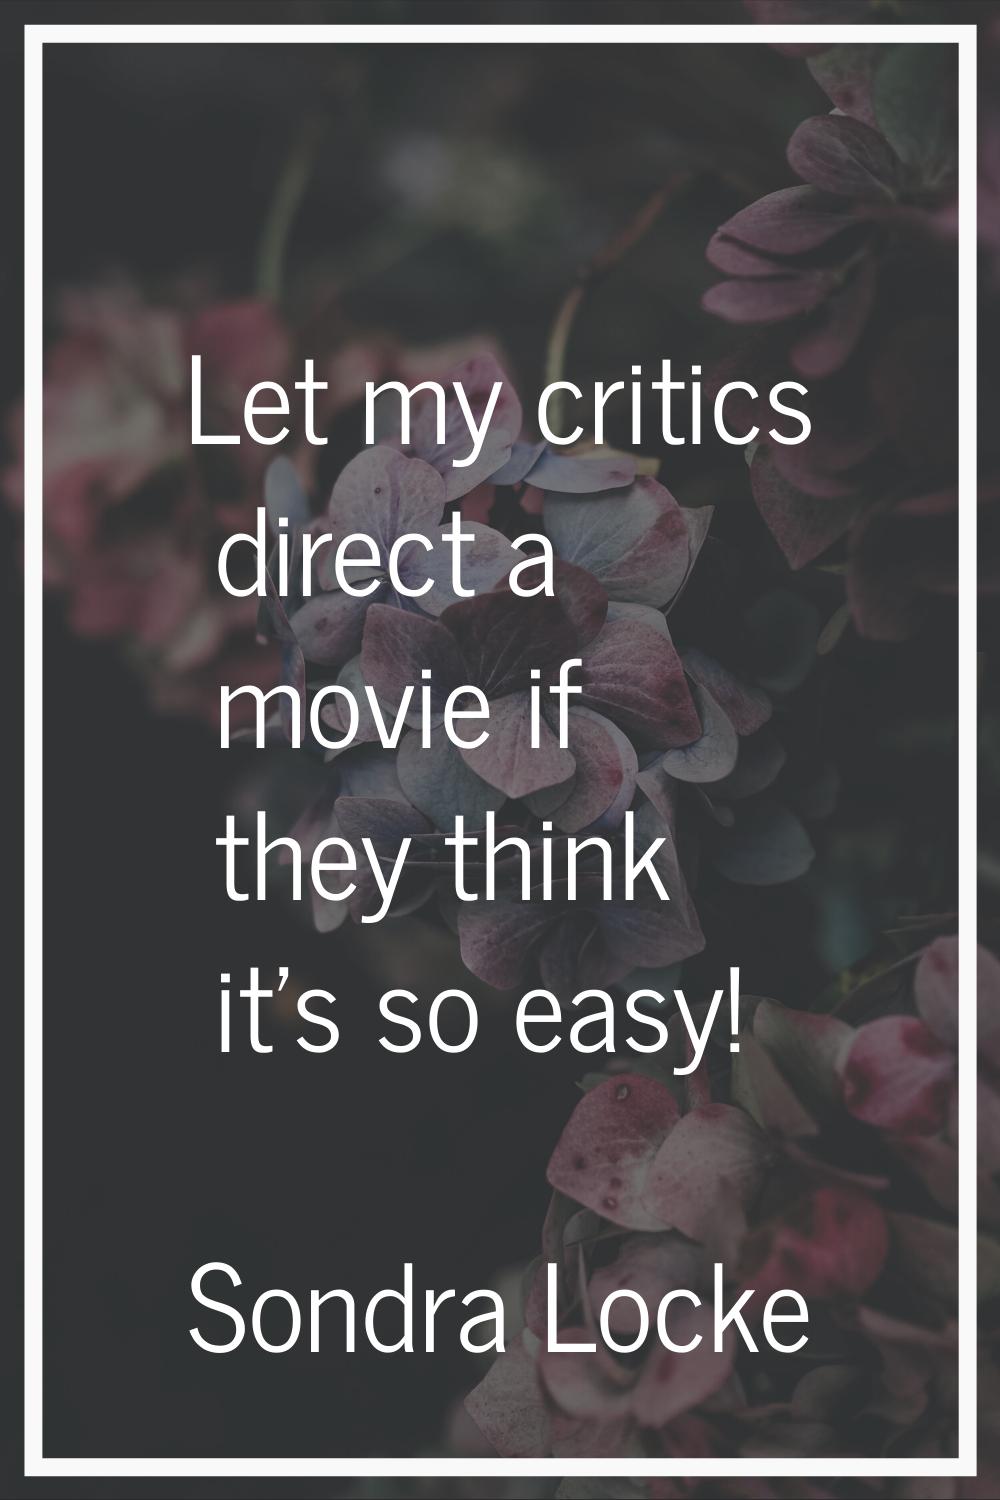 Let my critics direct a movie if they think it's so easy!